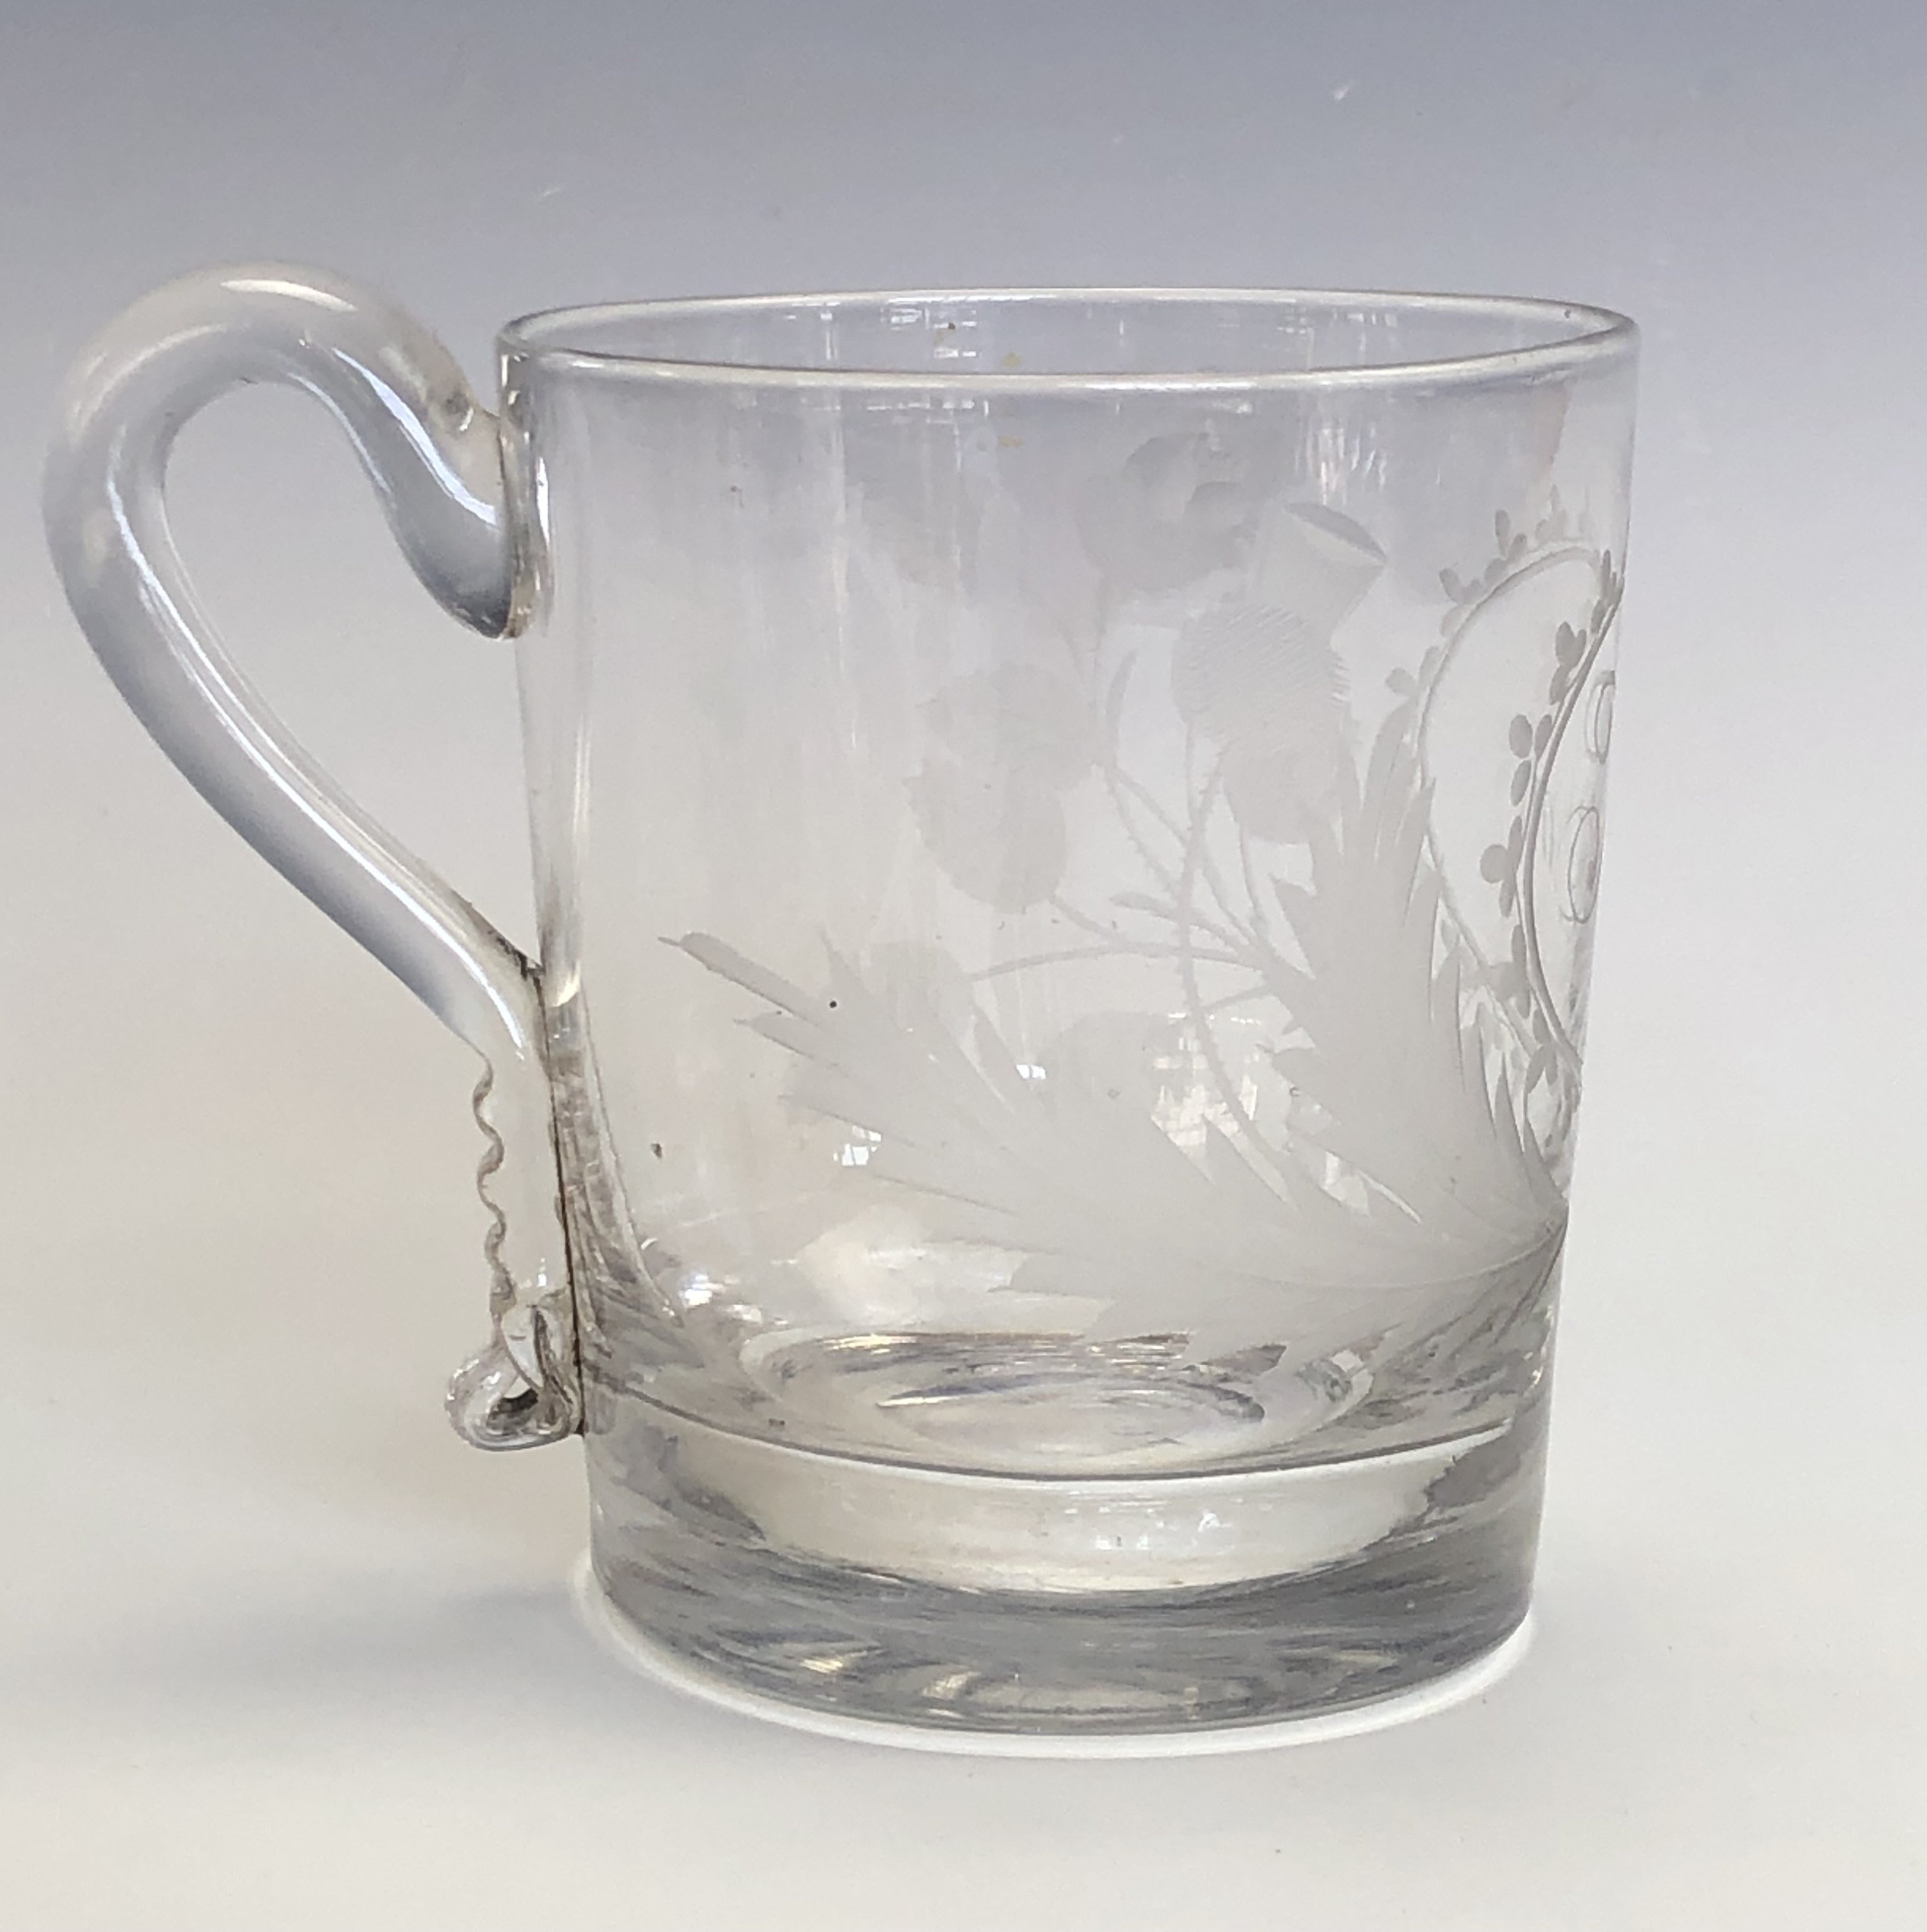 An early 19th Century glass Christening cup, wheel-cut with the name "Tom" within a floral - Image 5 of 6